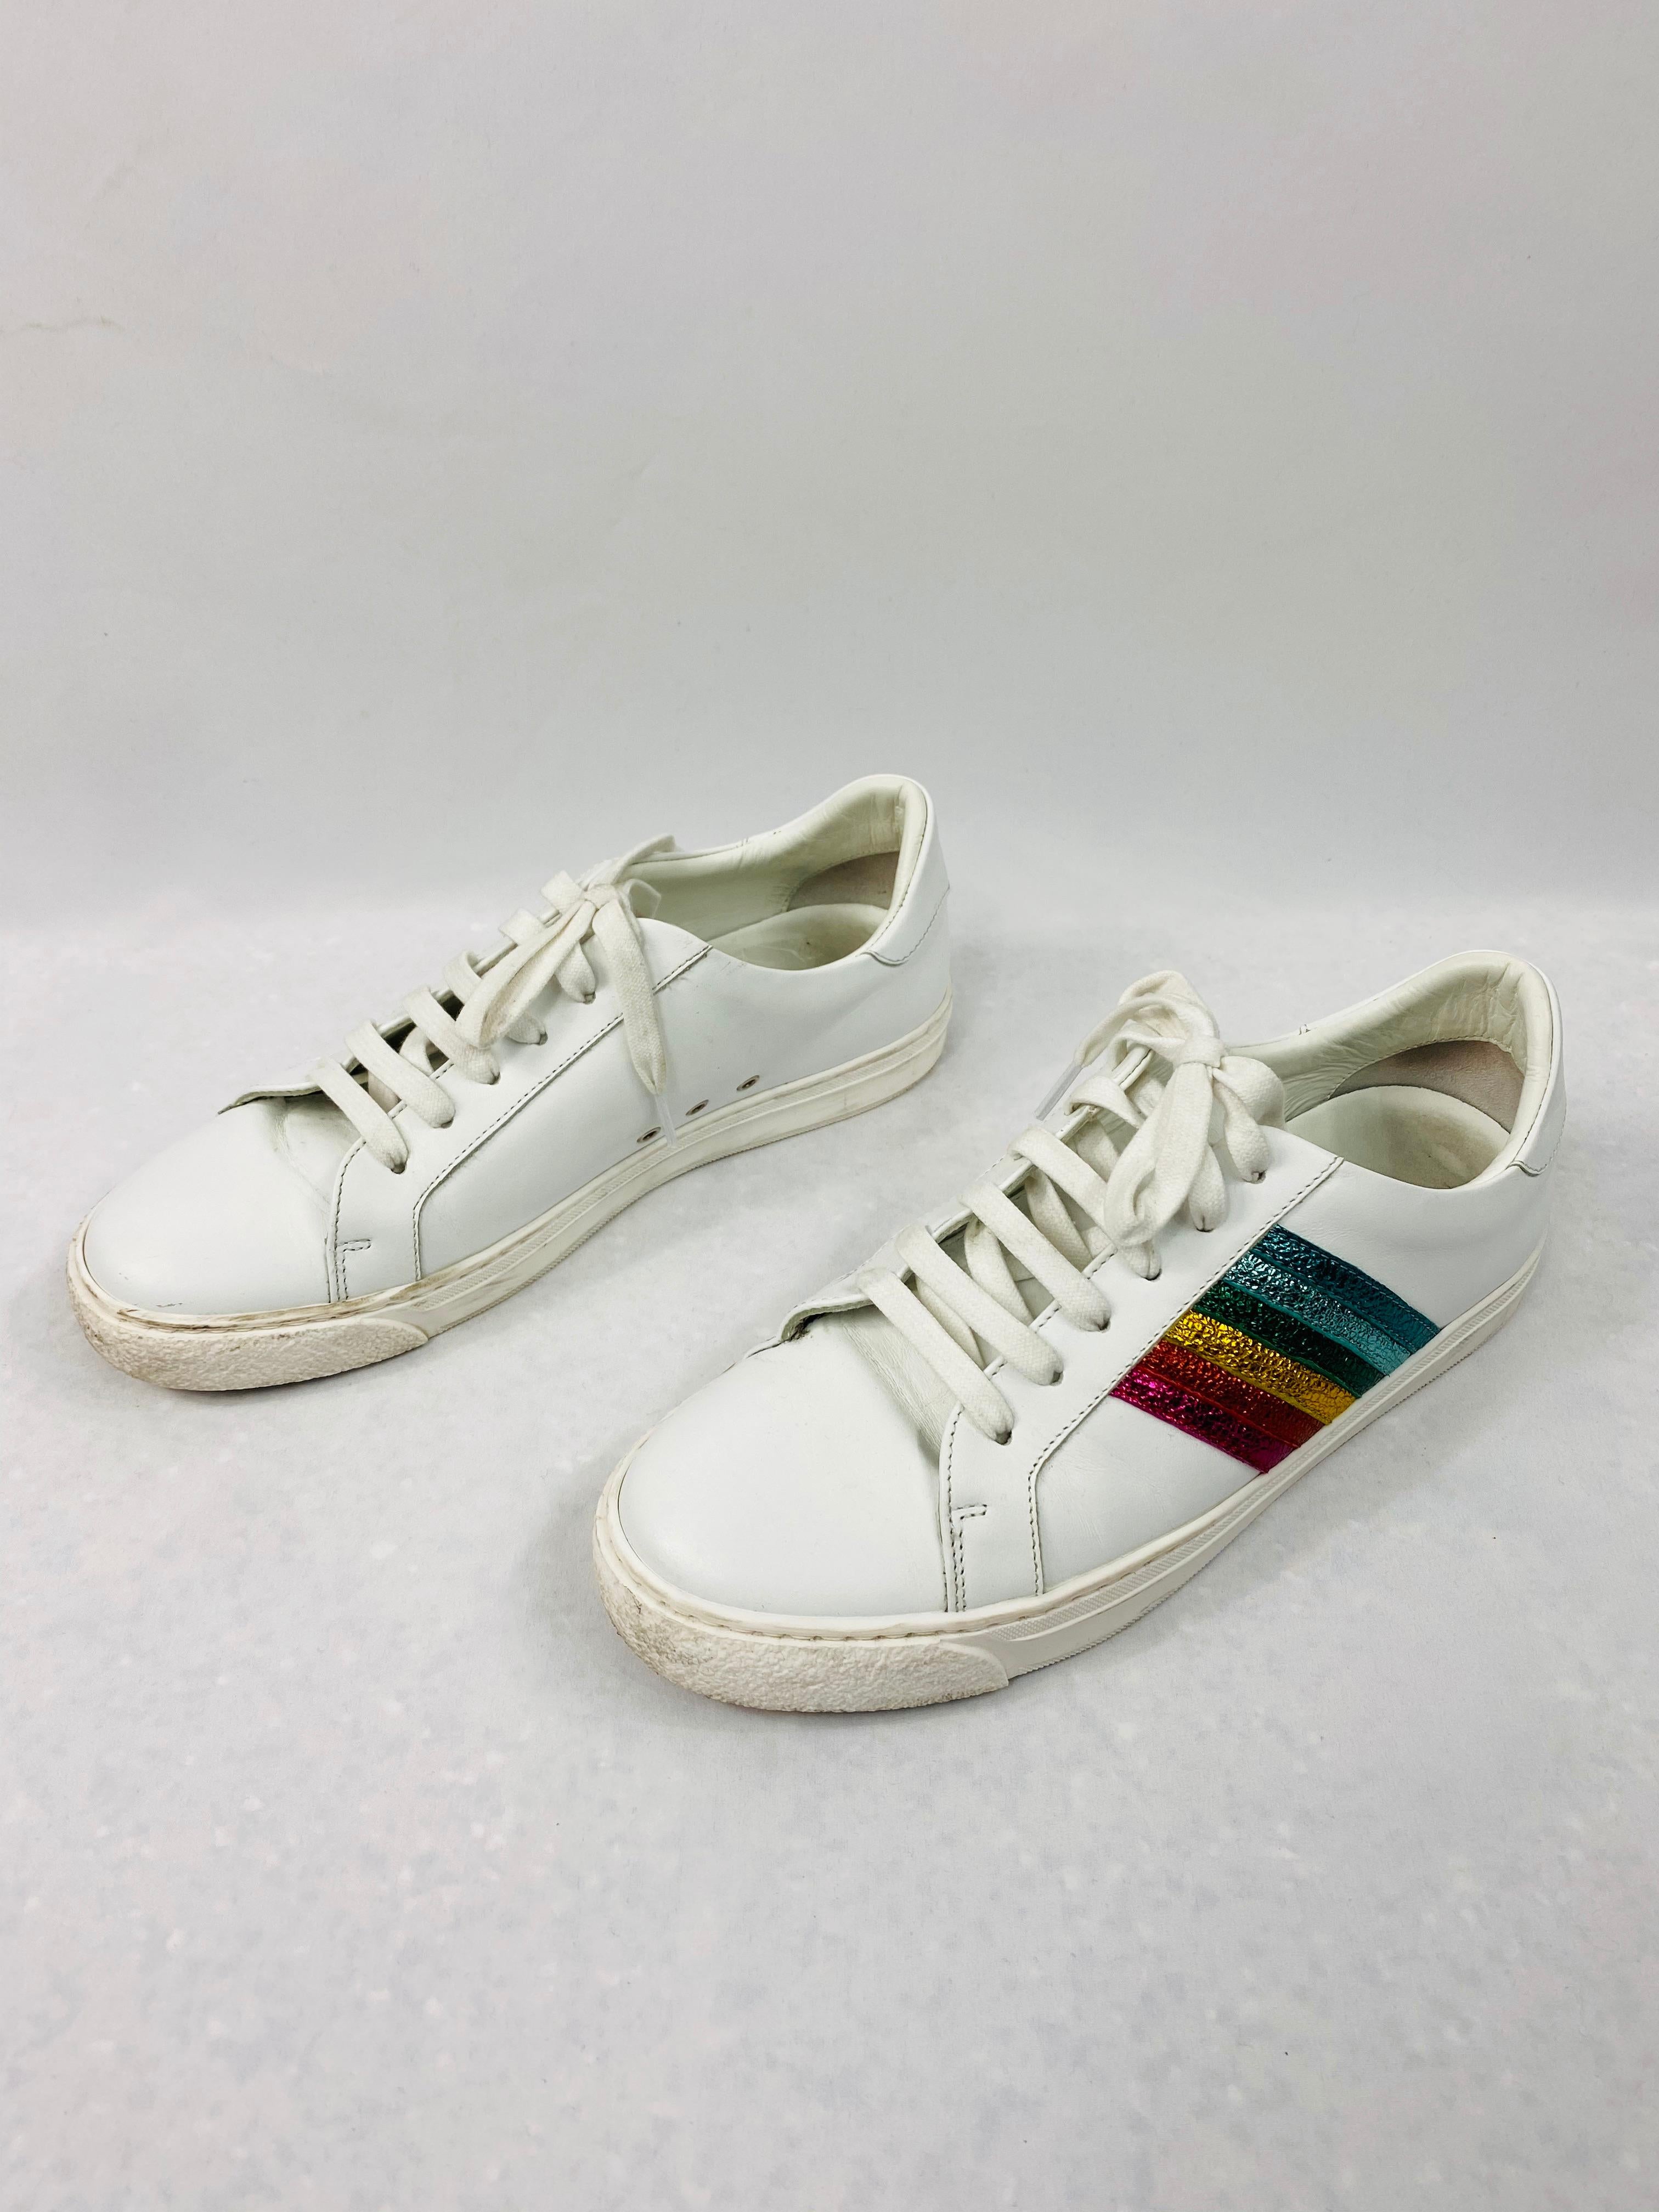 Product details:

Featuring white leather and diagonal striped rainbow metallic leather detail on the sides, white lace up.
